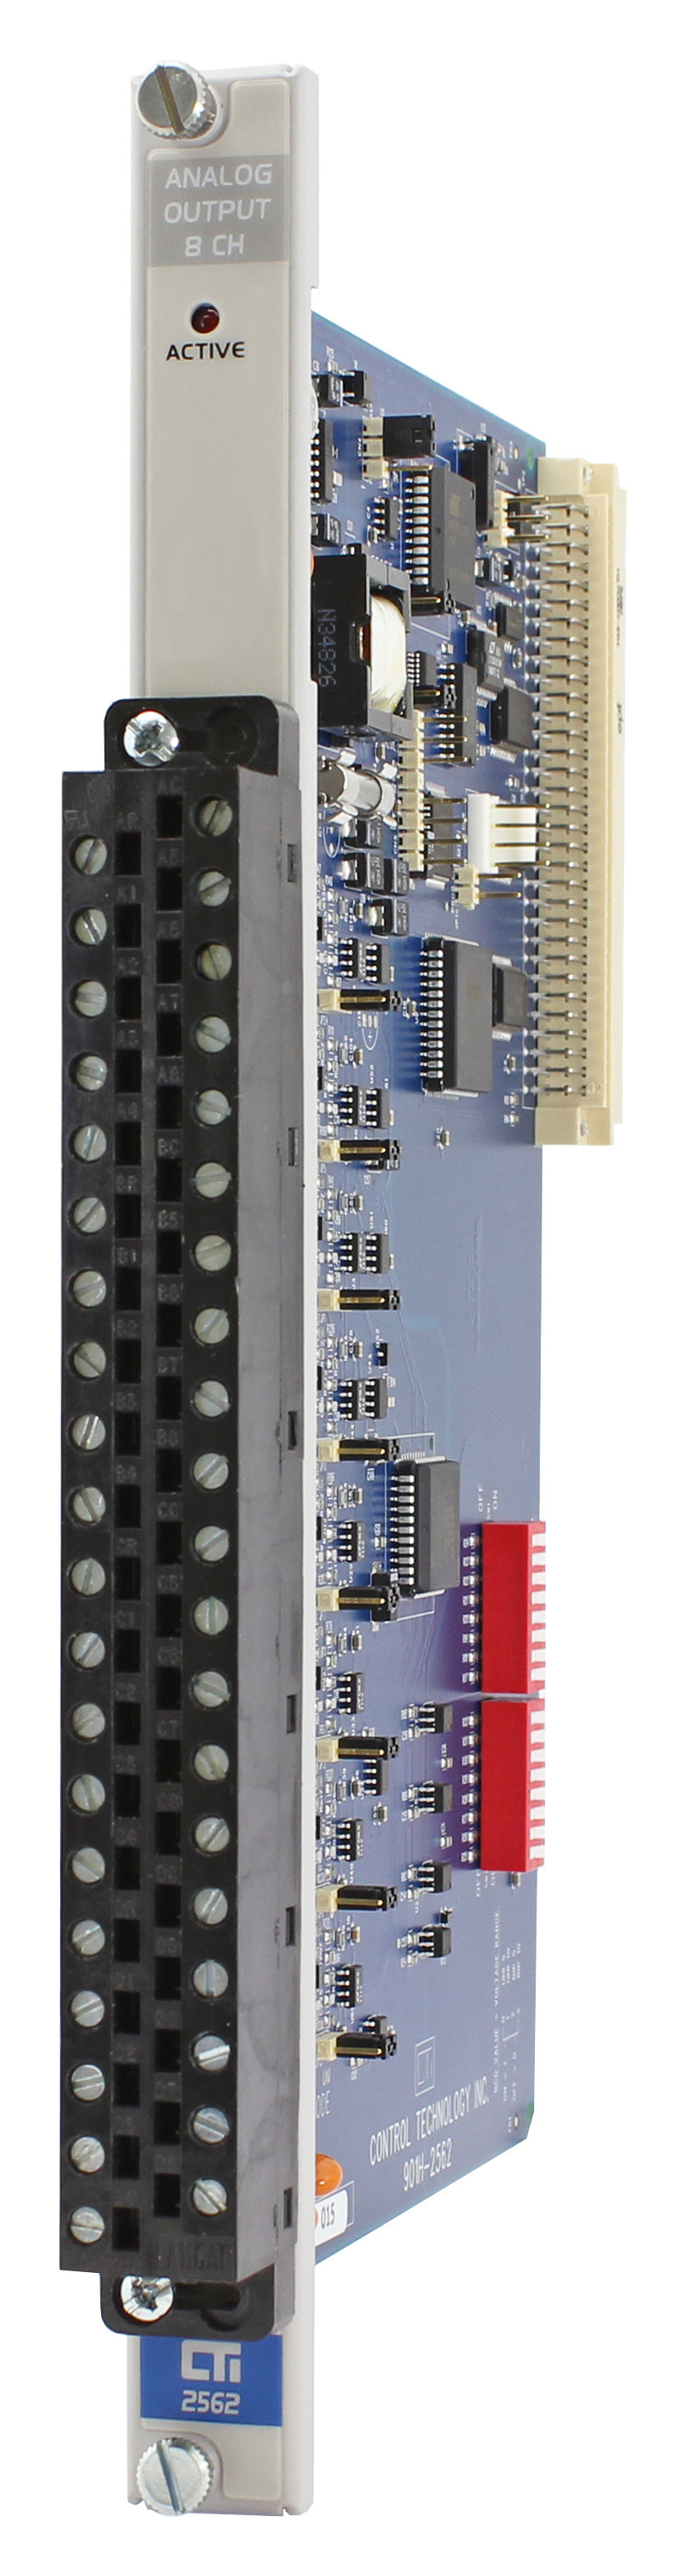 2562 8-Channel Analog Output Module